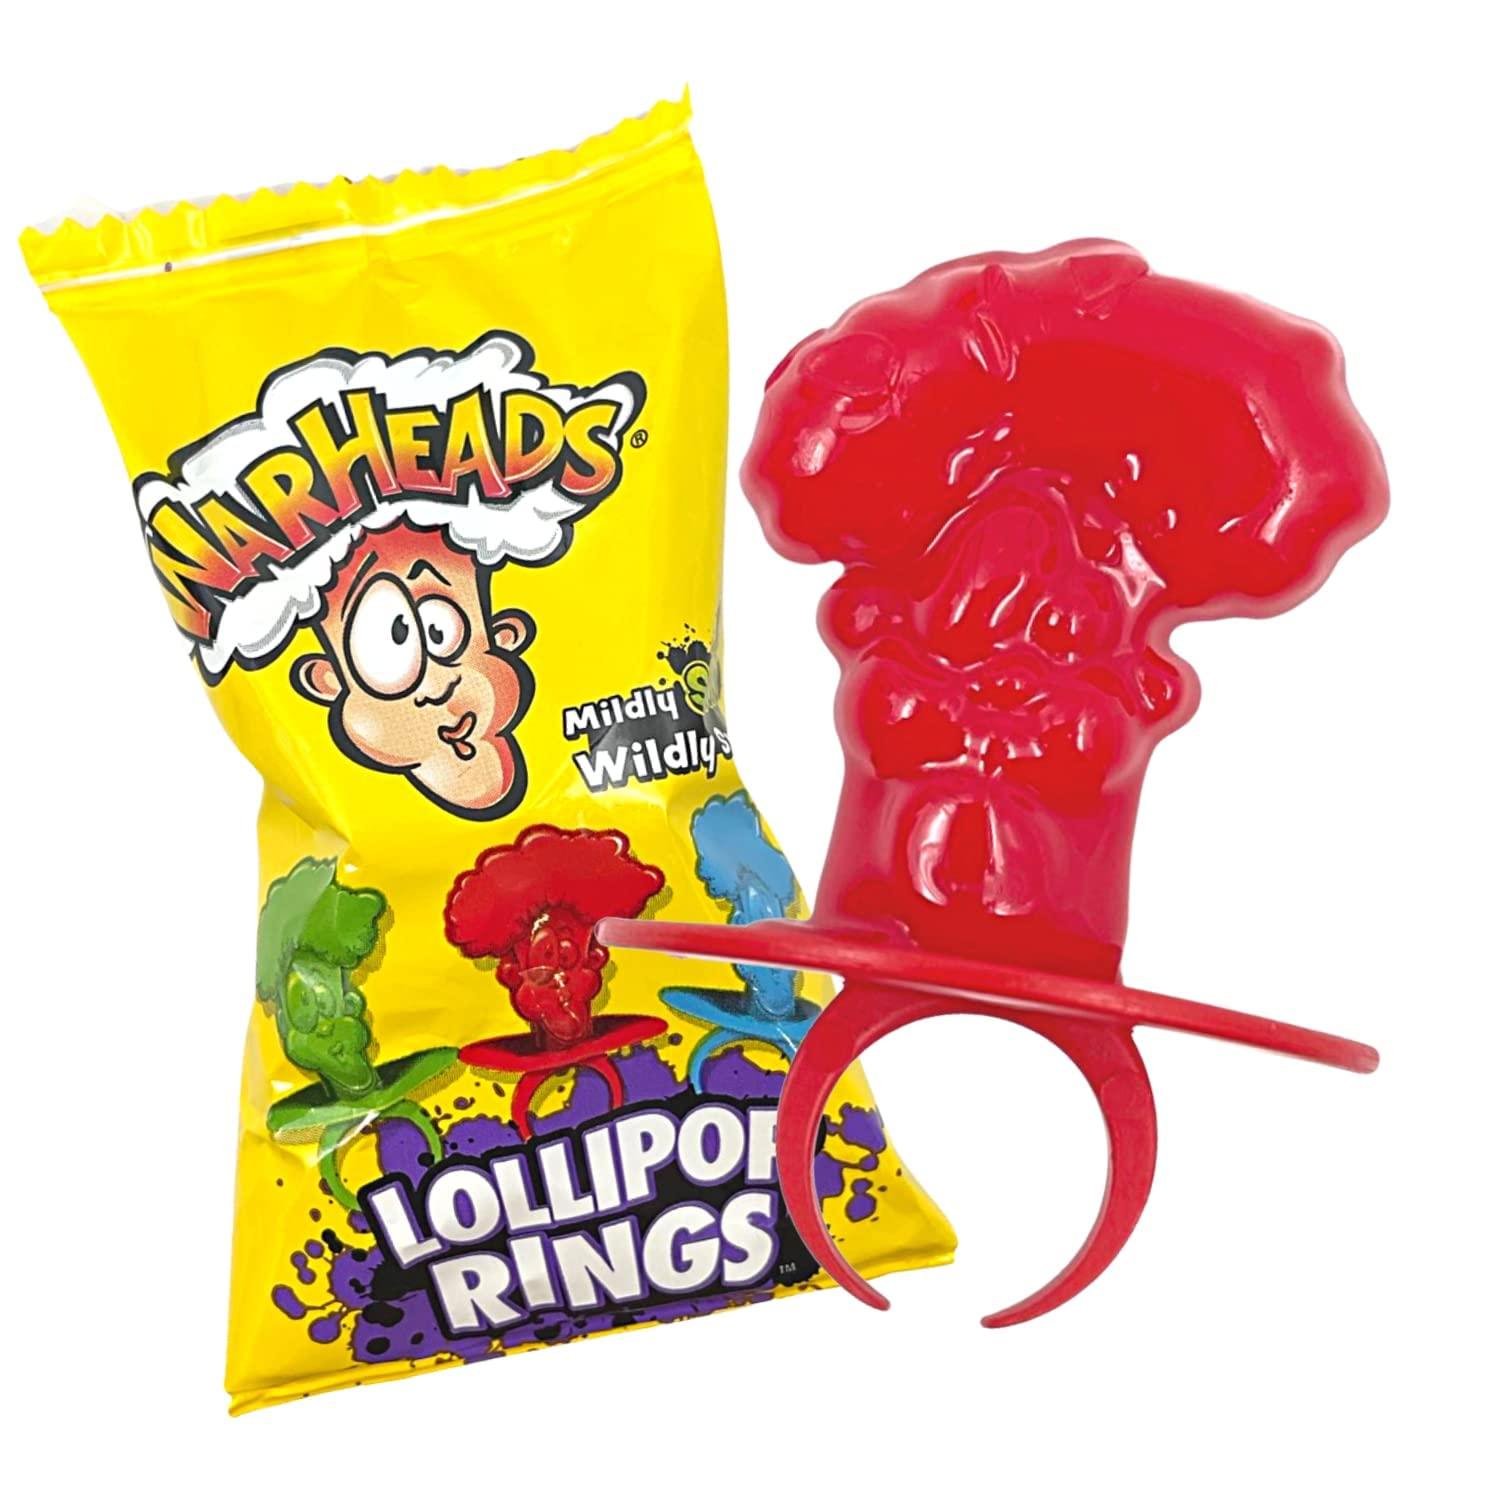 Warheads Sweet & Sour Lollipop Rings - Extreme Snacks